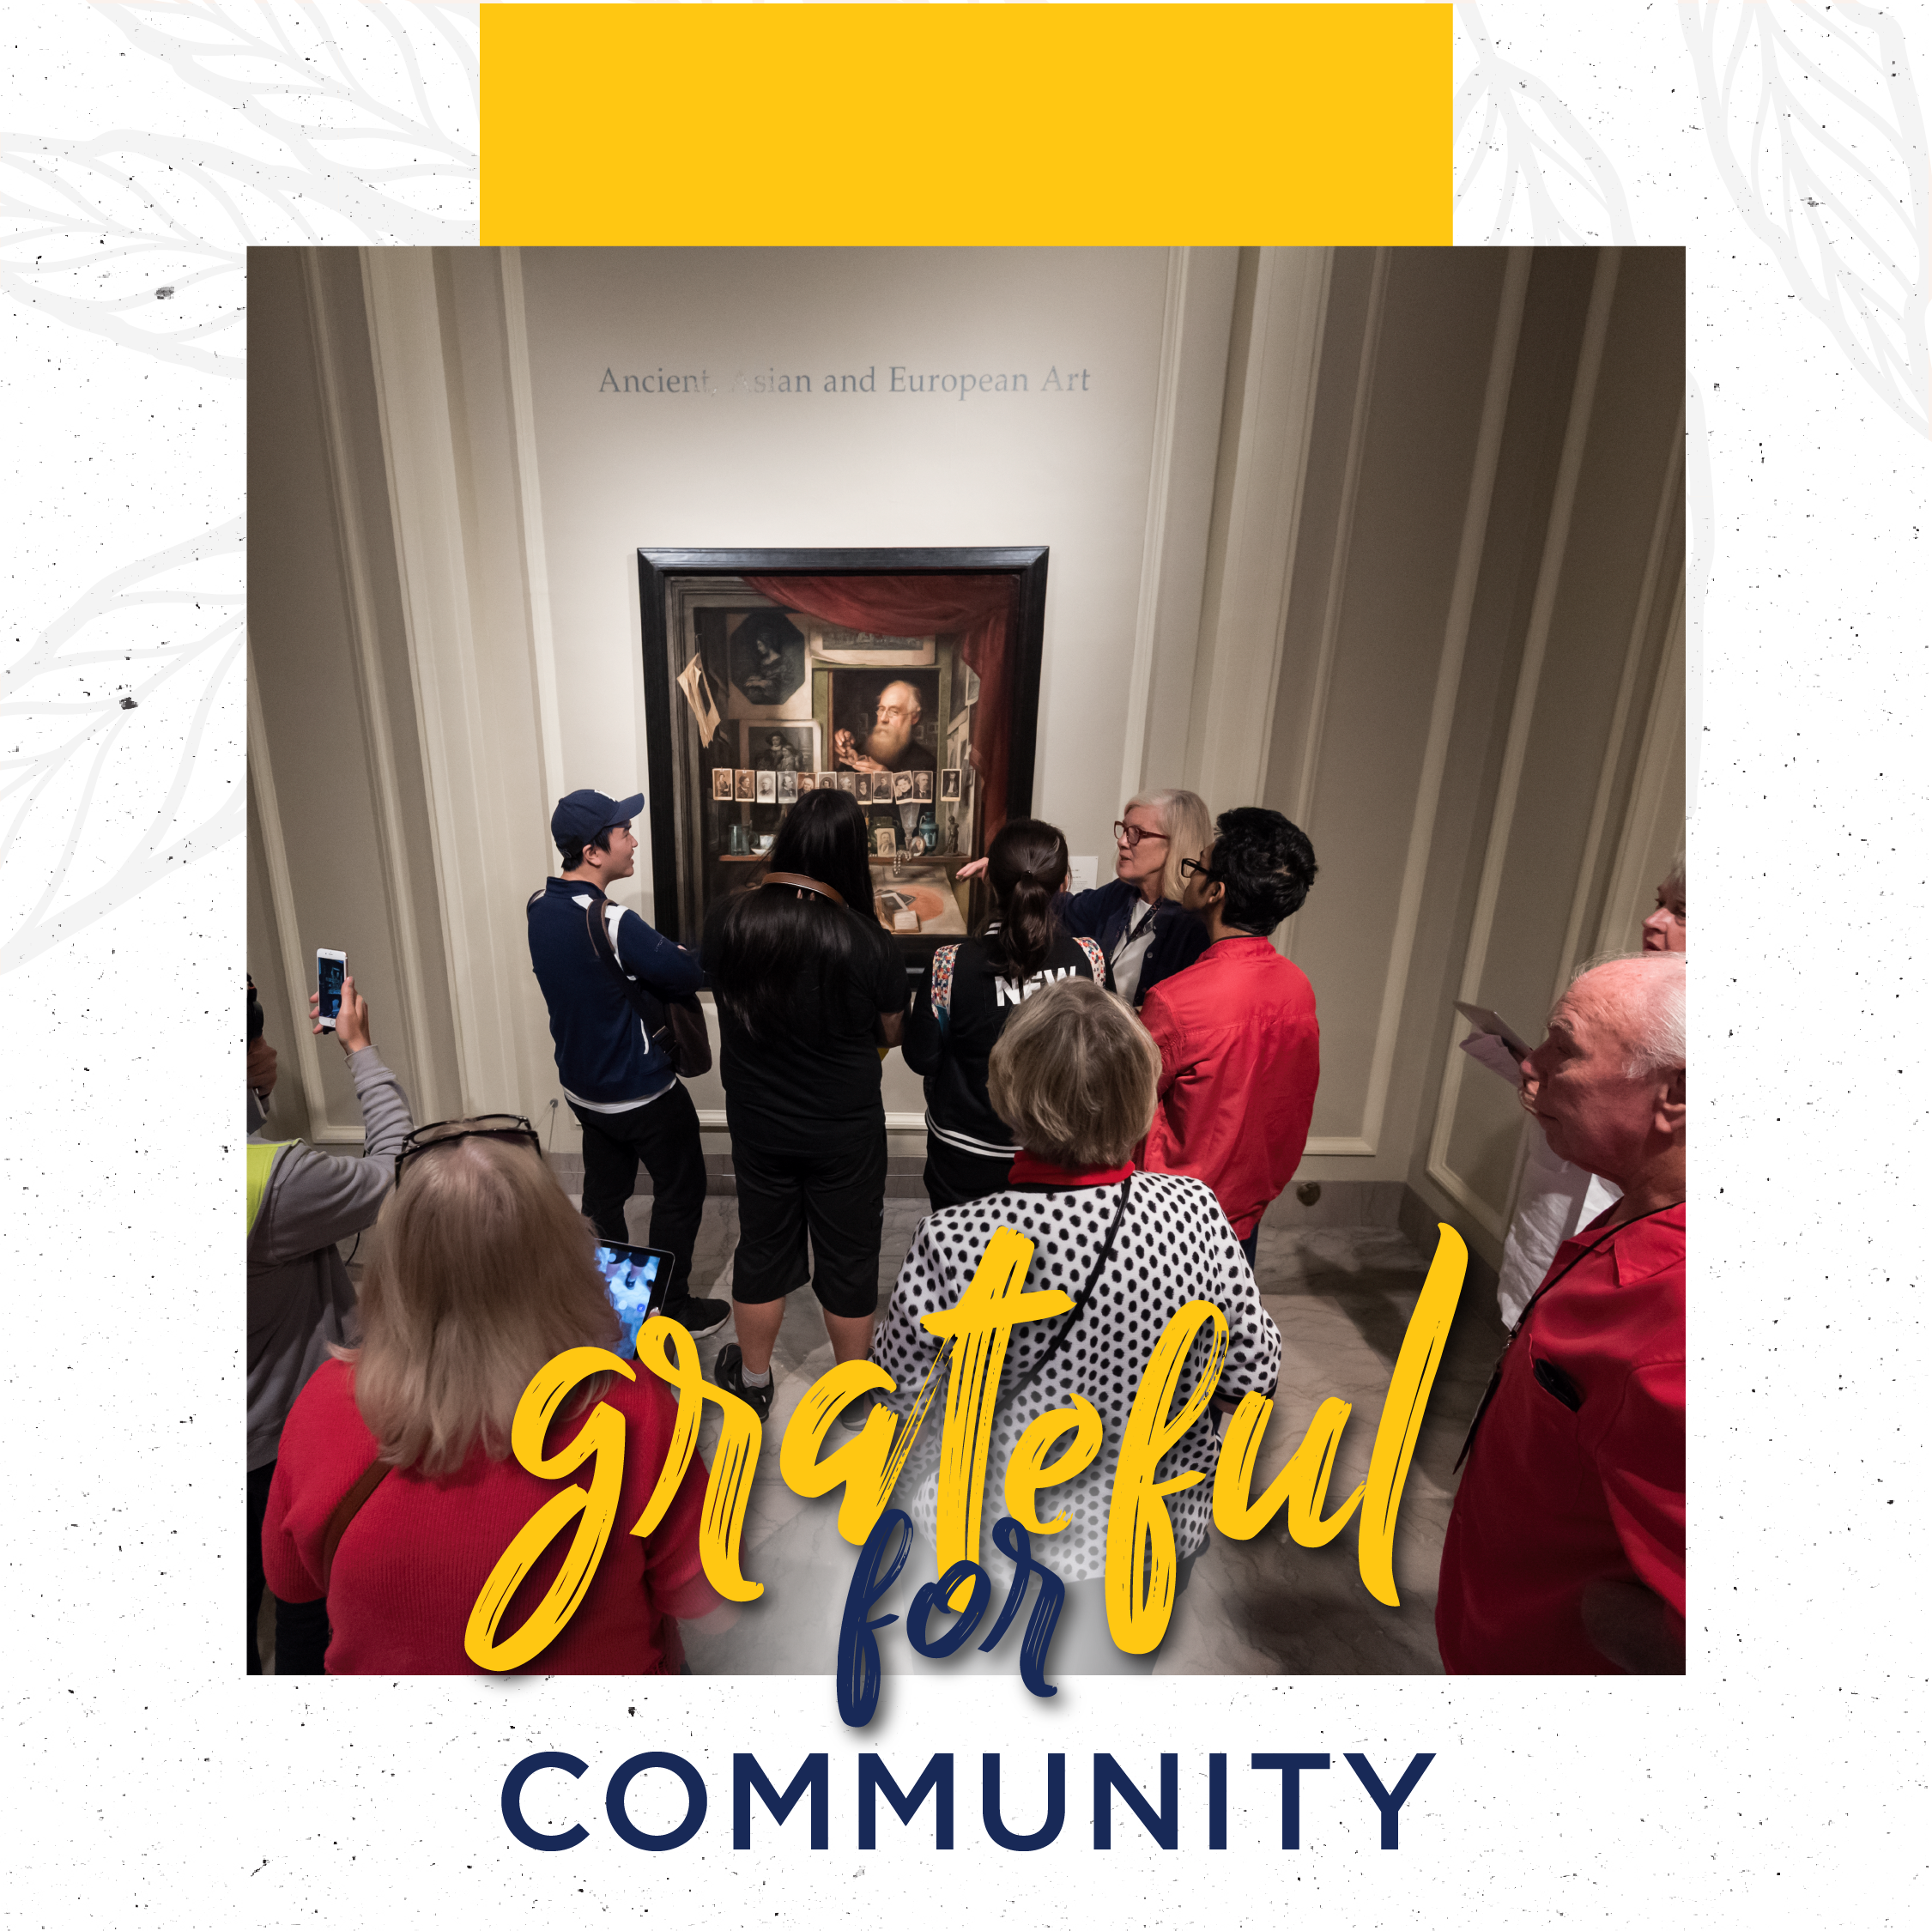 grateful for community - wordmark over a group of people at a museum admiring a painting